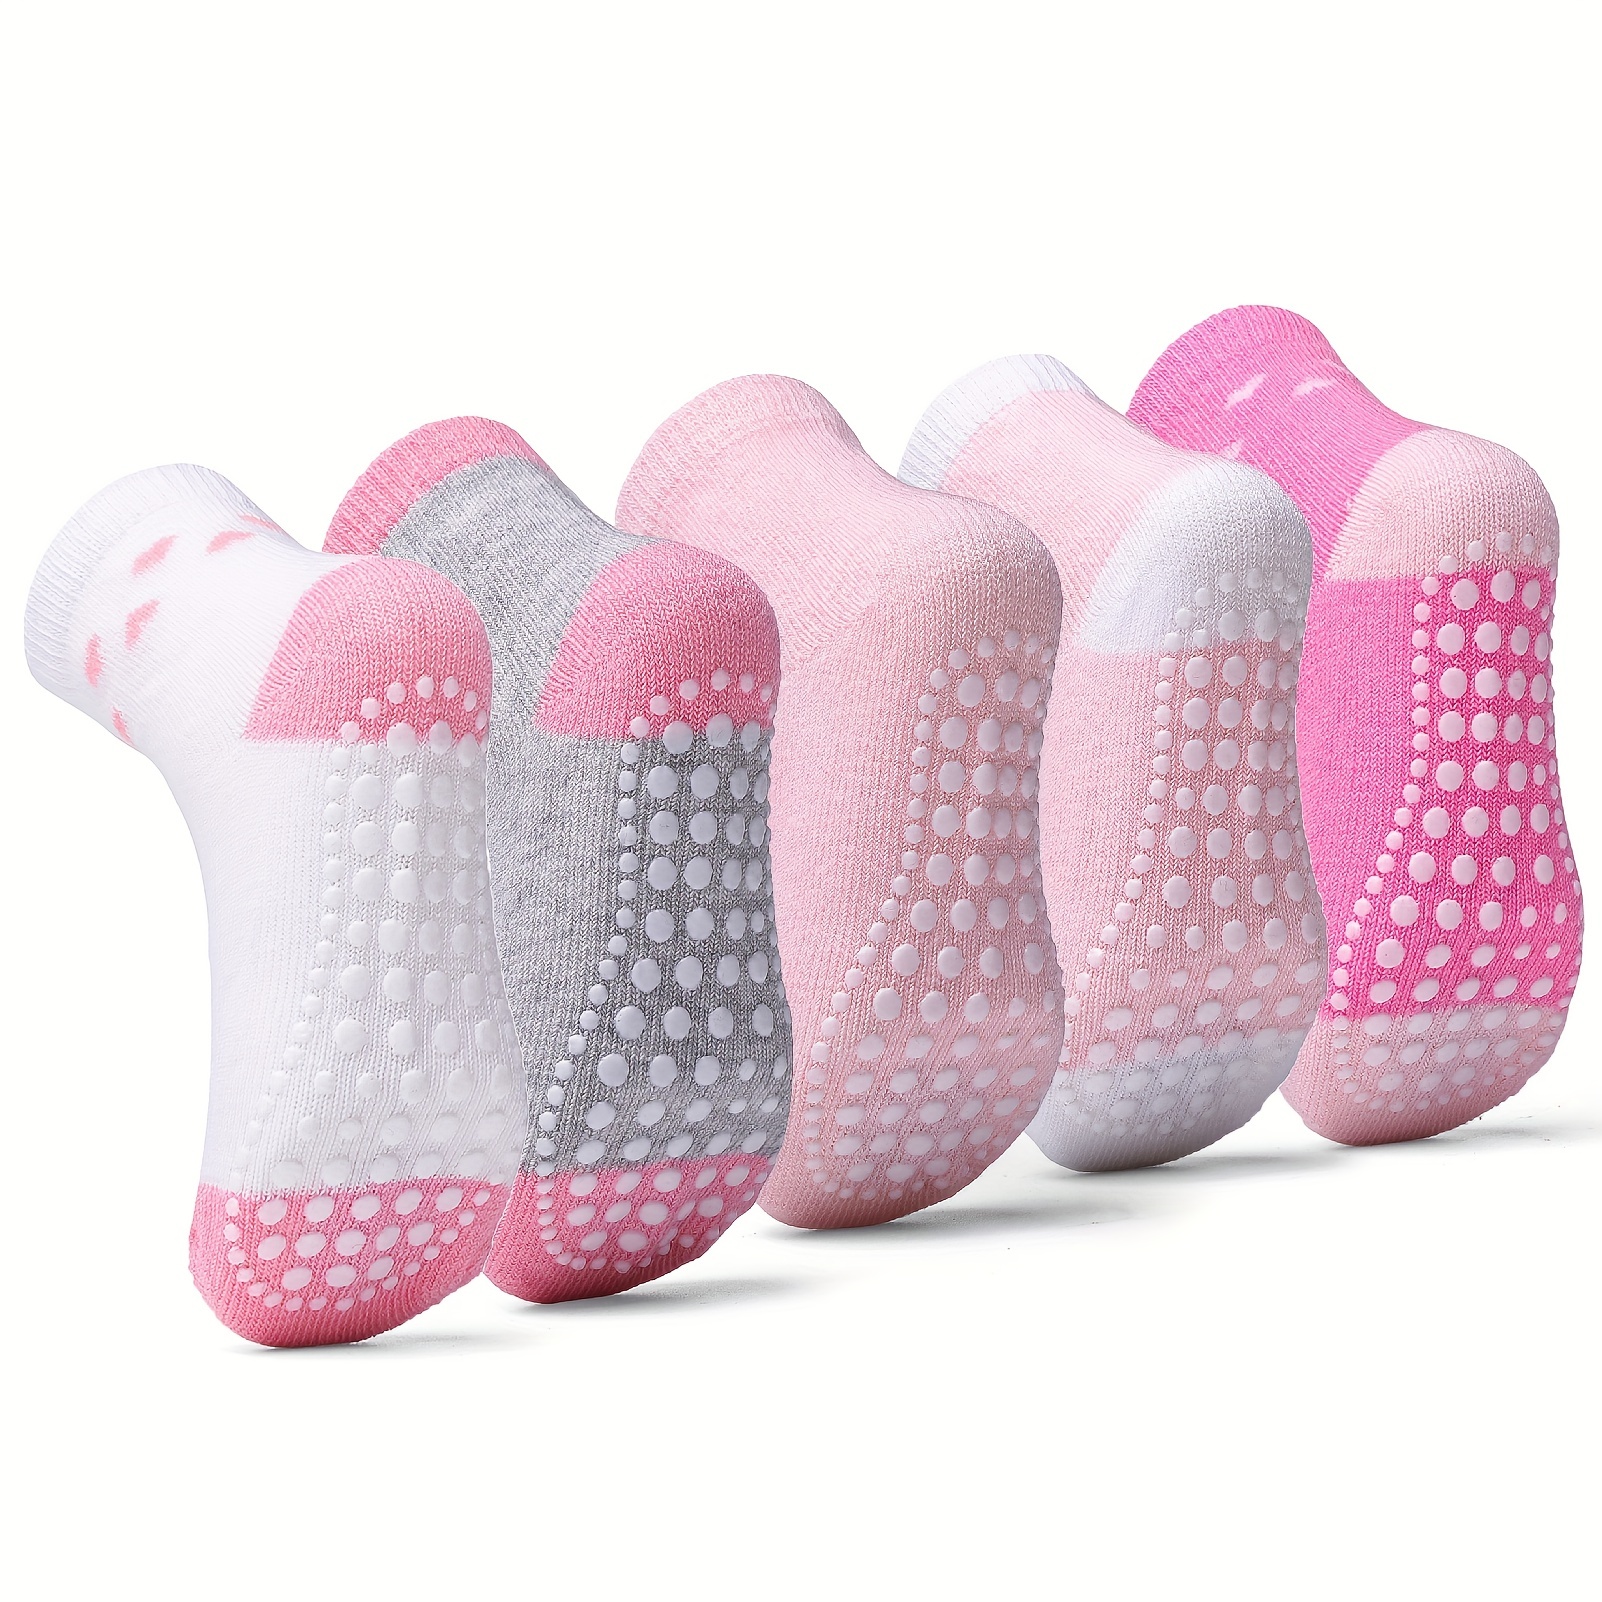 Non Slip Massage Bottom Trampoline Socks For Kids Skid Proof, Cushioned  Jumping Socks For Toddlers And Babies From Dandankang, $1.08